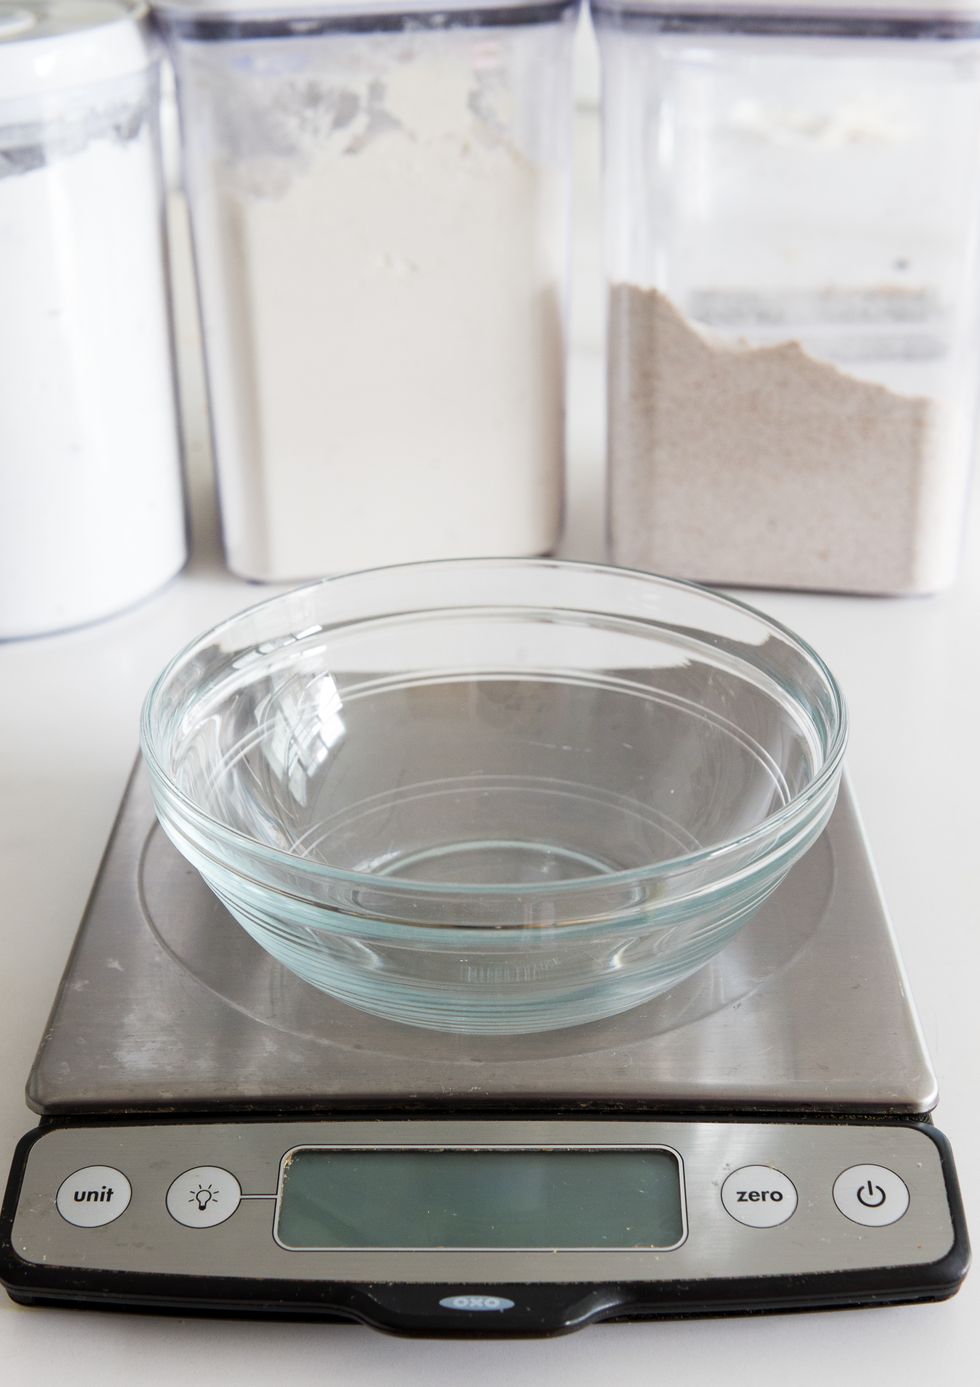 Favorite Baking Tools: Kitchen Scale